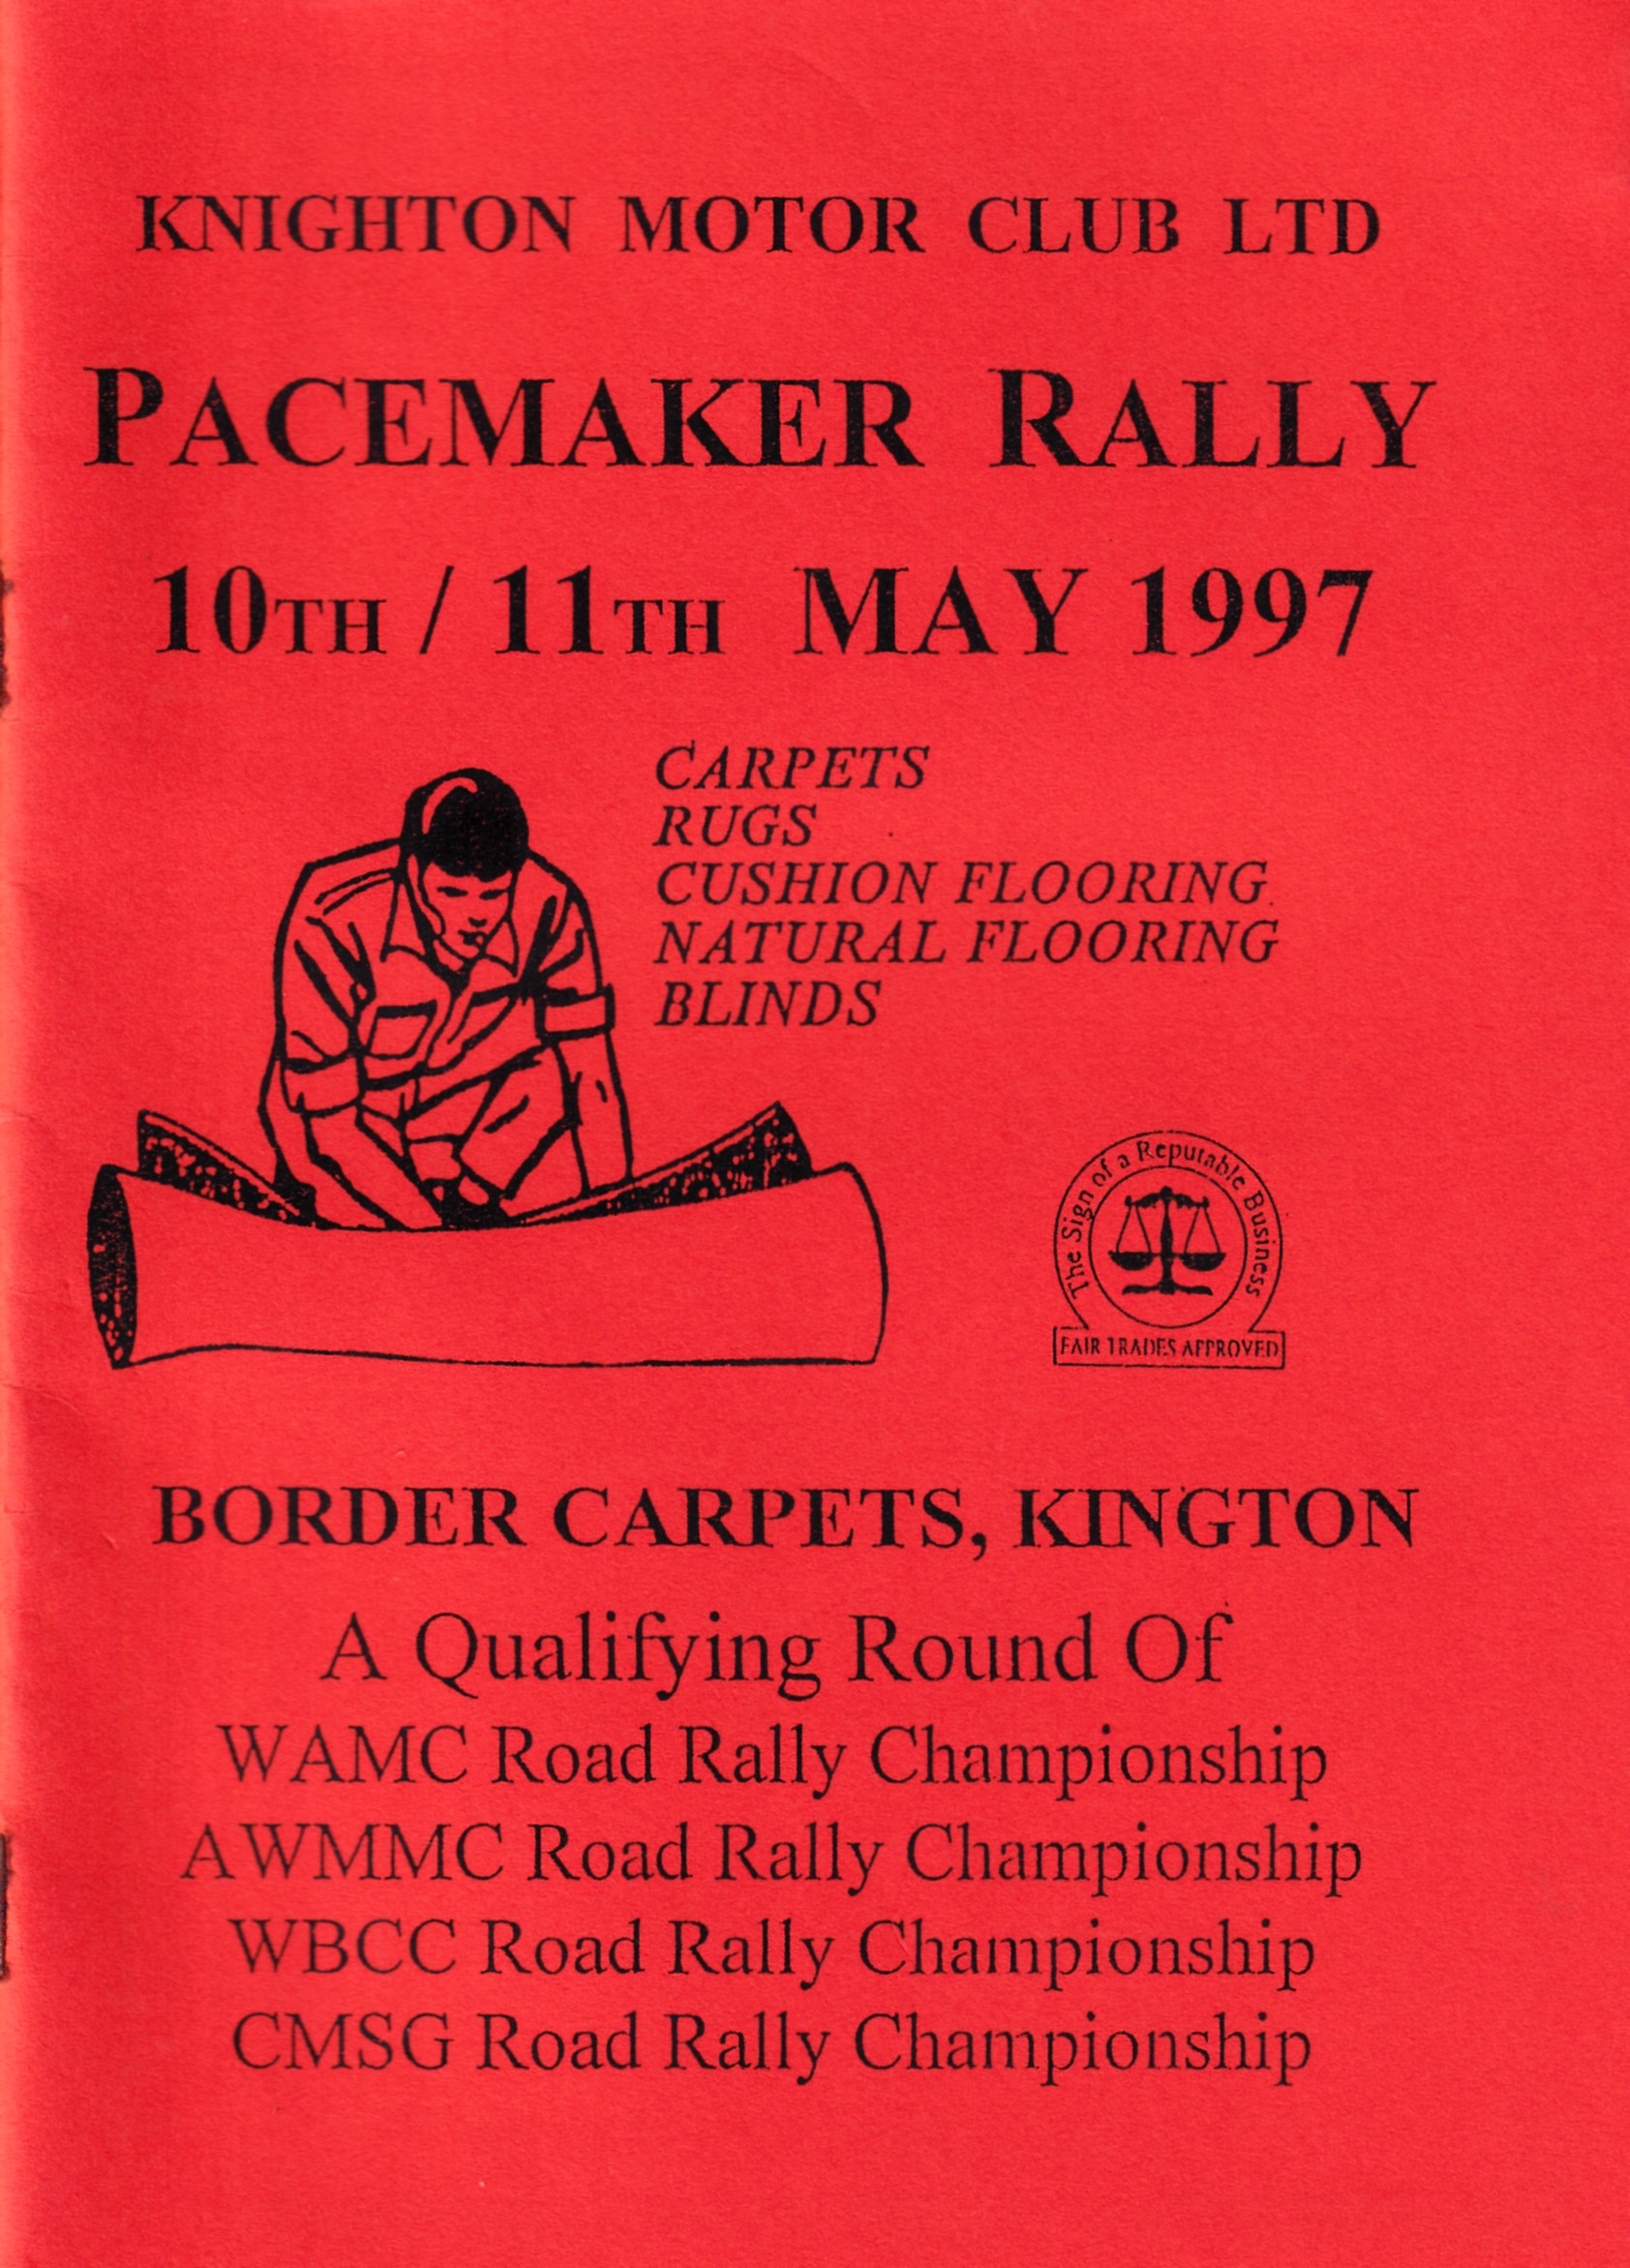 Pacemaker Rally 1997